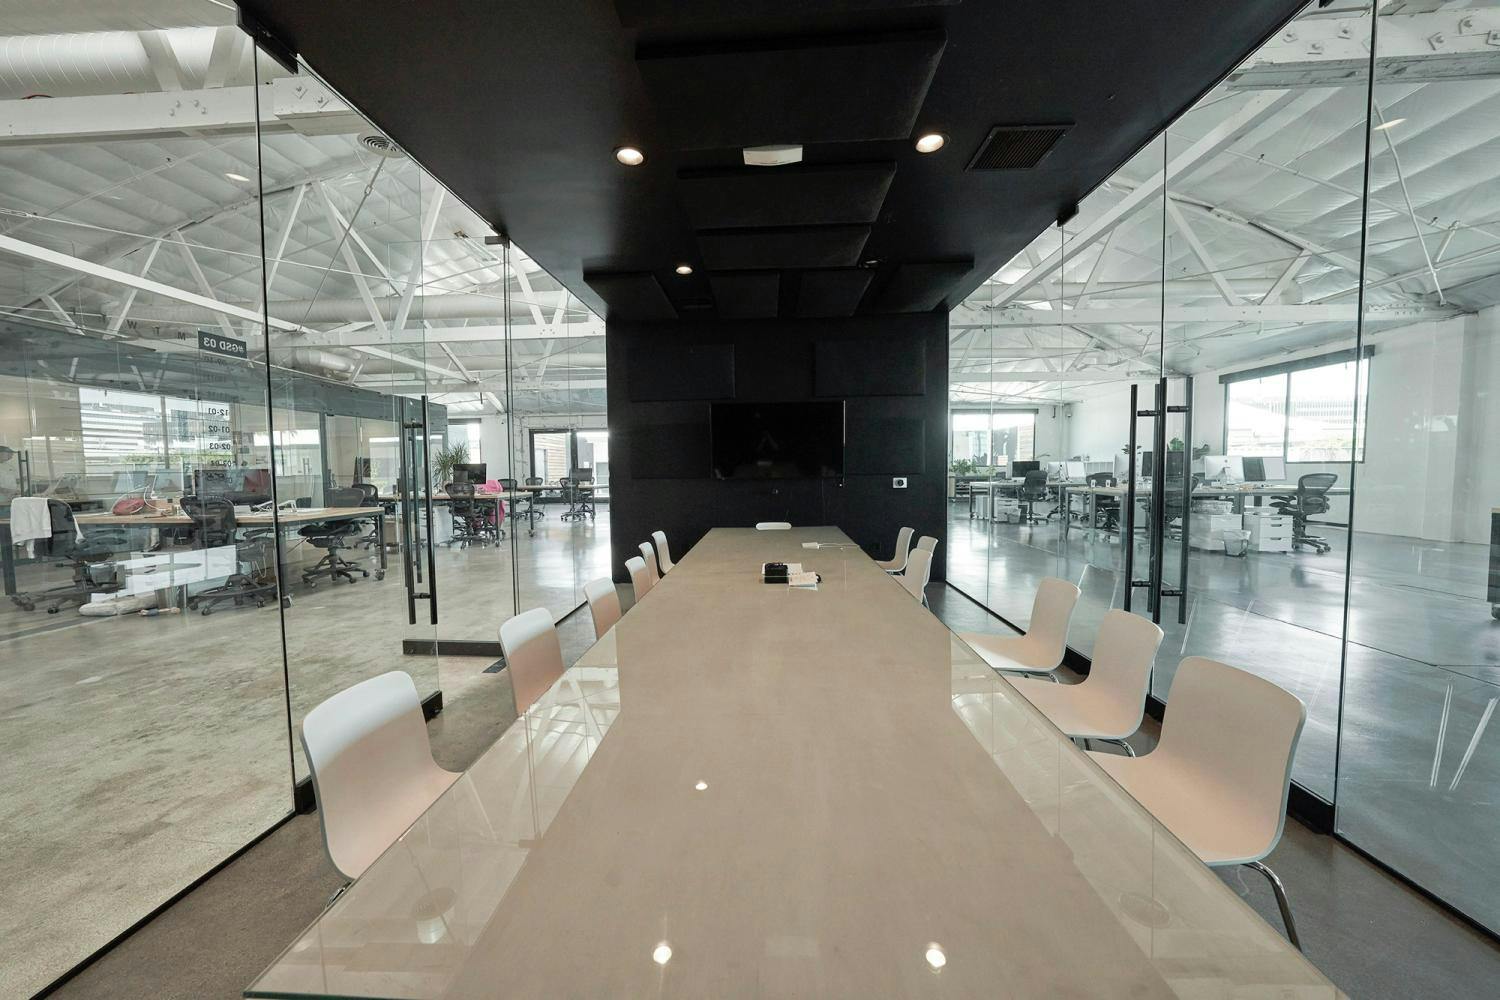 A spacious and bright conference room with a long table, surrounded by glass walls, looking out to a working office area.